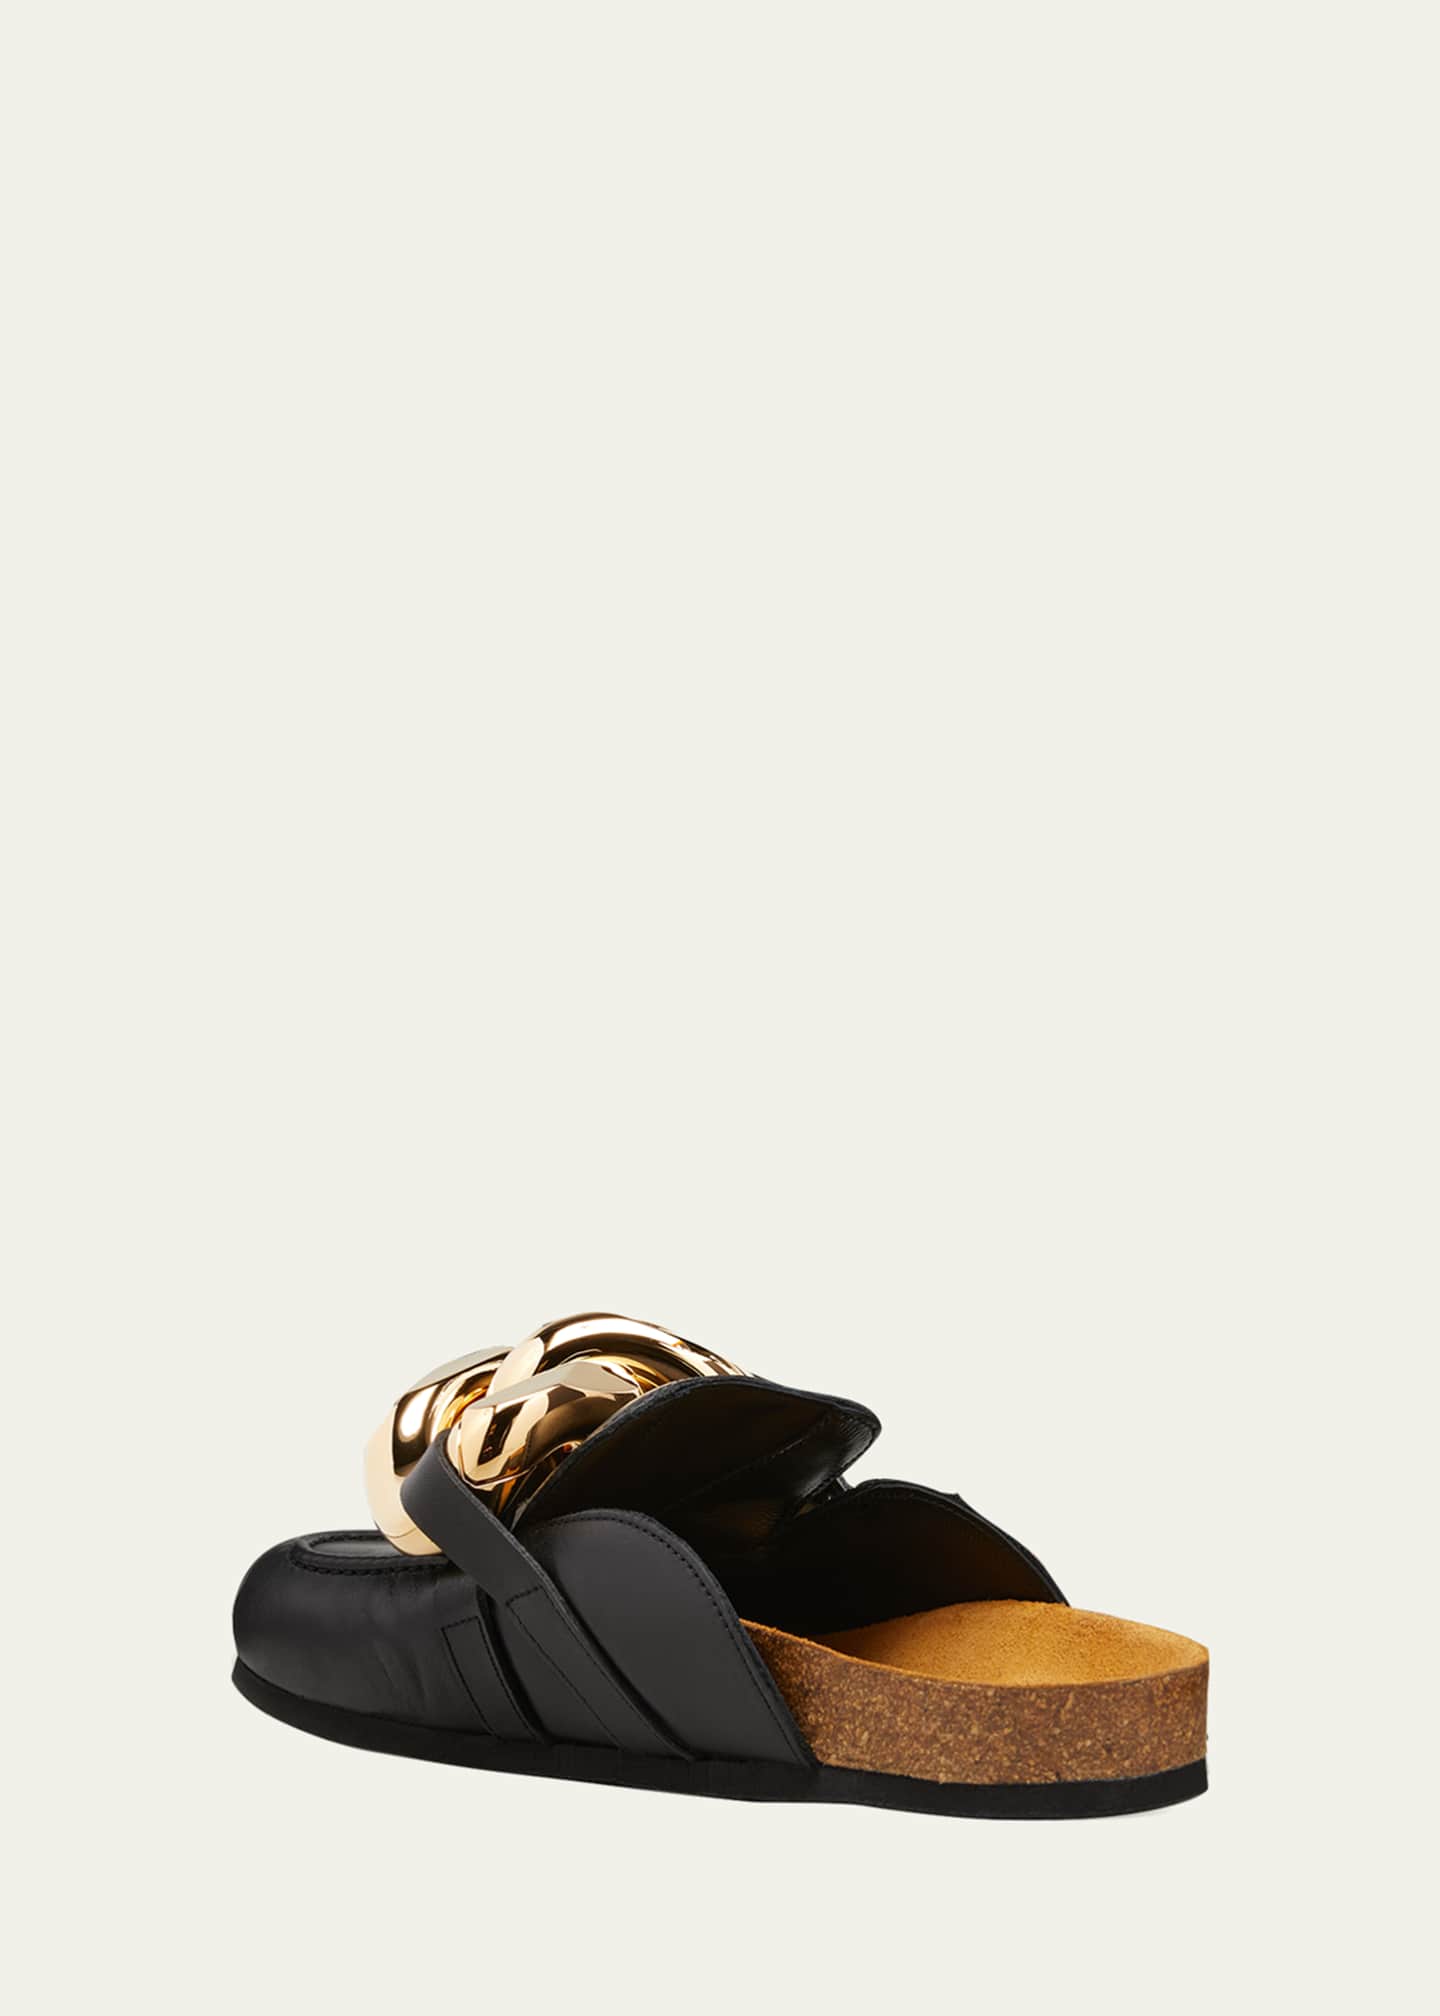 JW Anderson Chunky Napa Chain Slide Mules Image 4 of 5